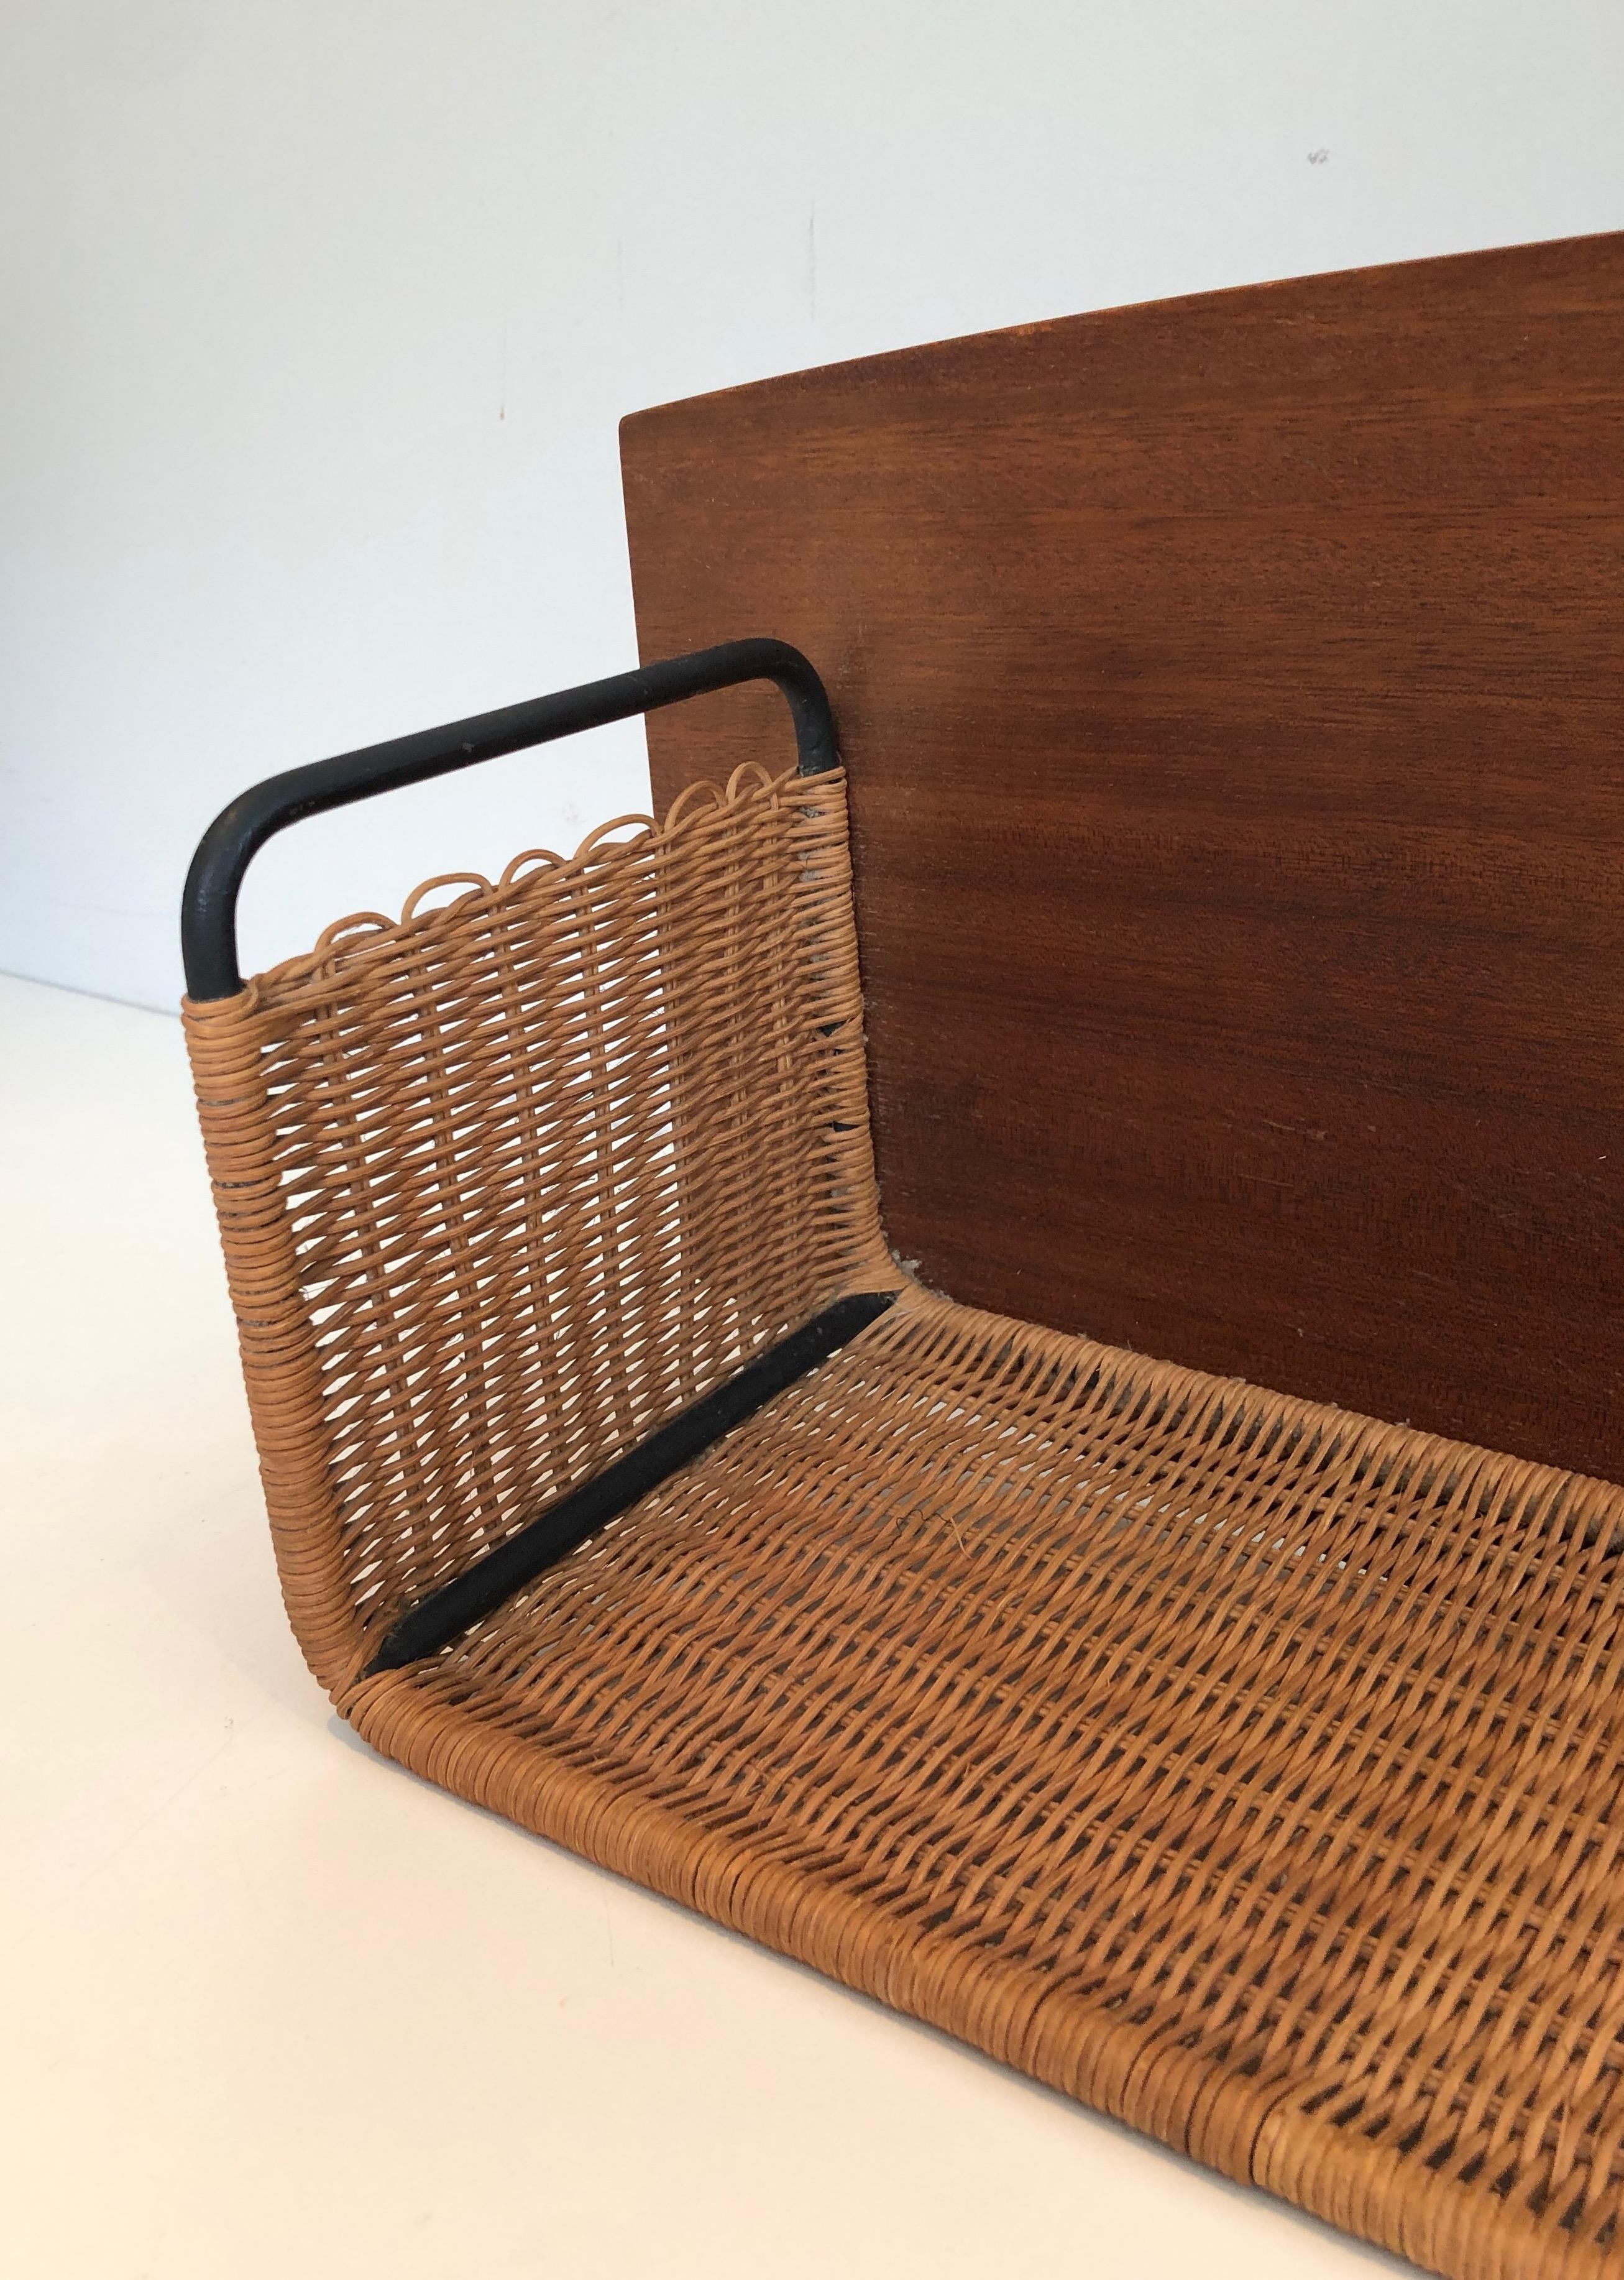 Wood, Rattan and Lacquered Metal Shelves Unit. French work by Raymond Glemeau For Sale 1